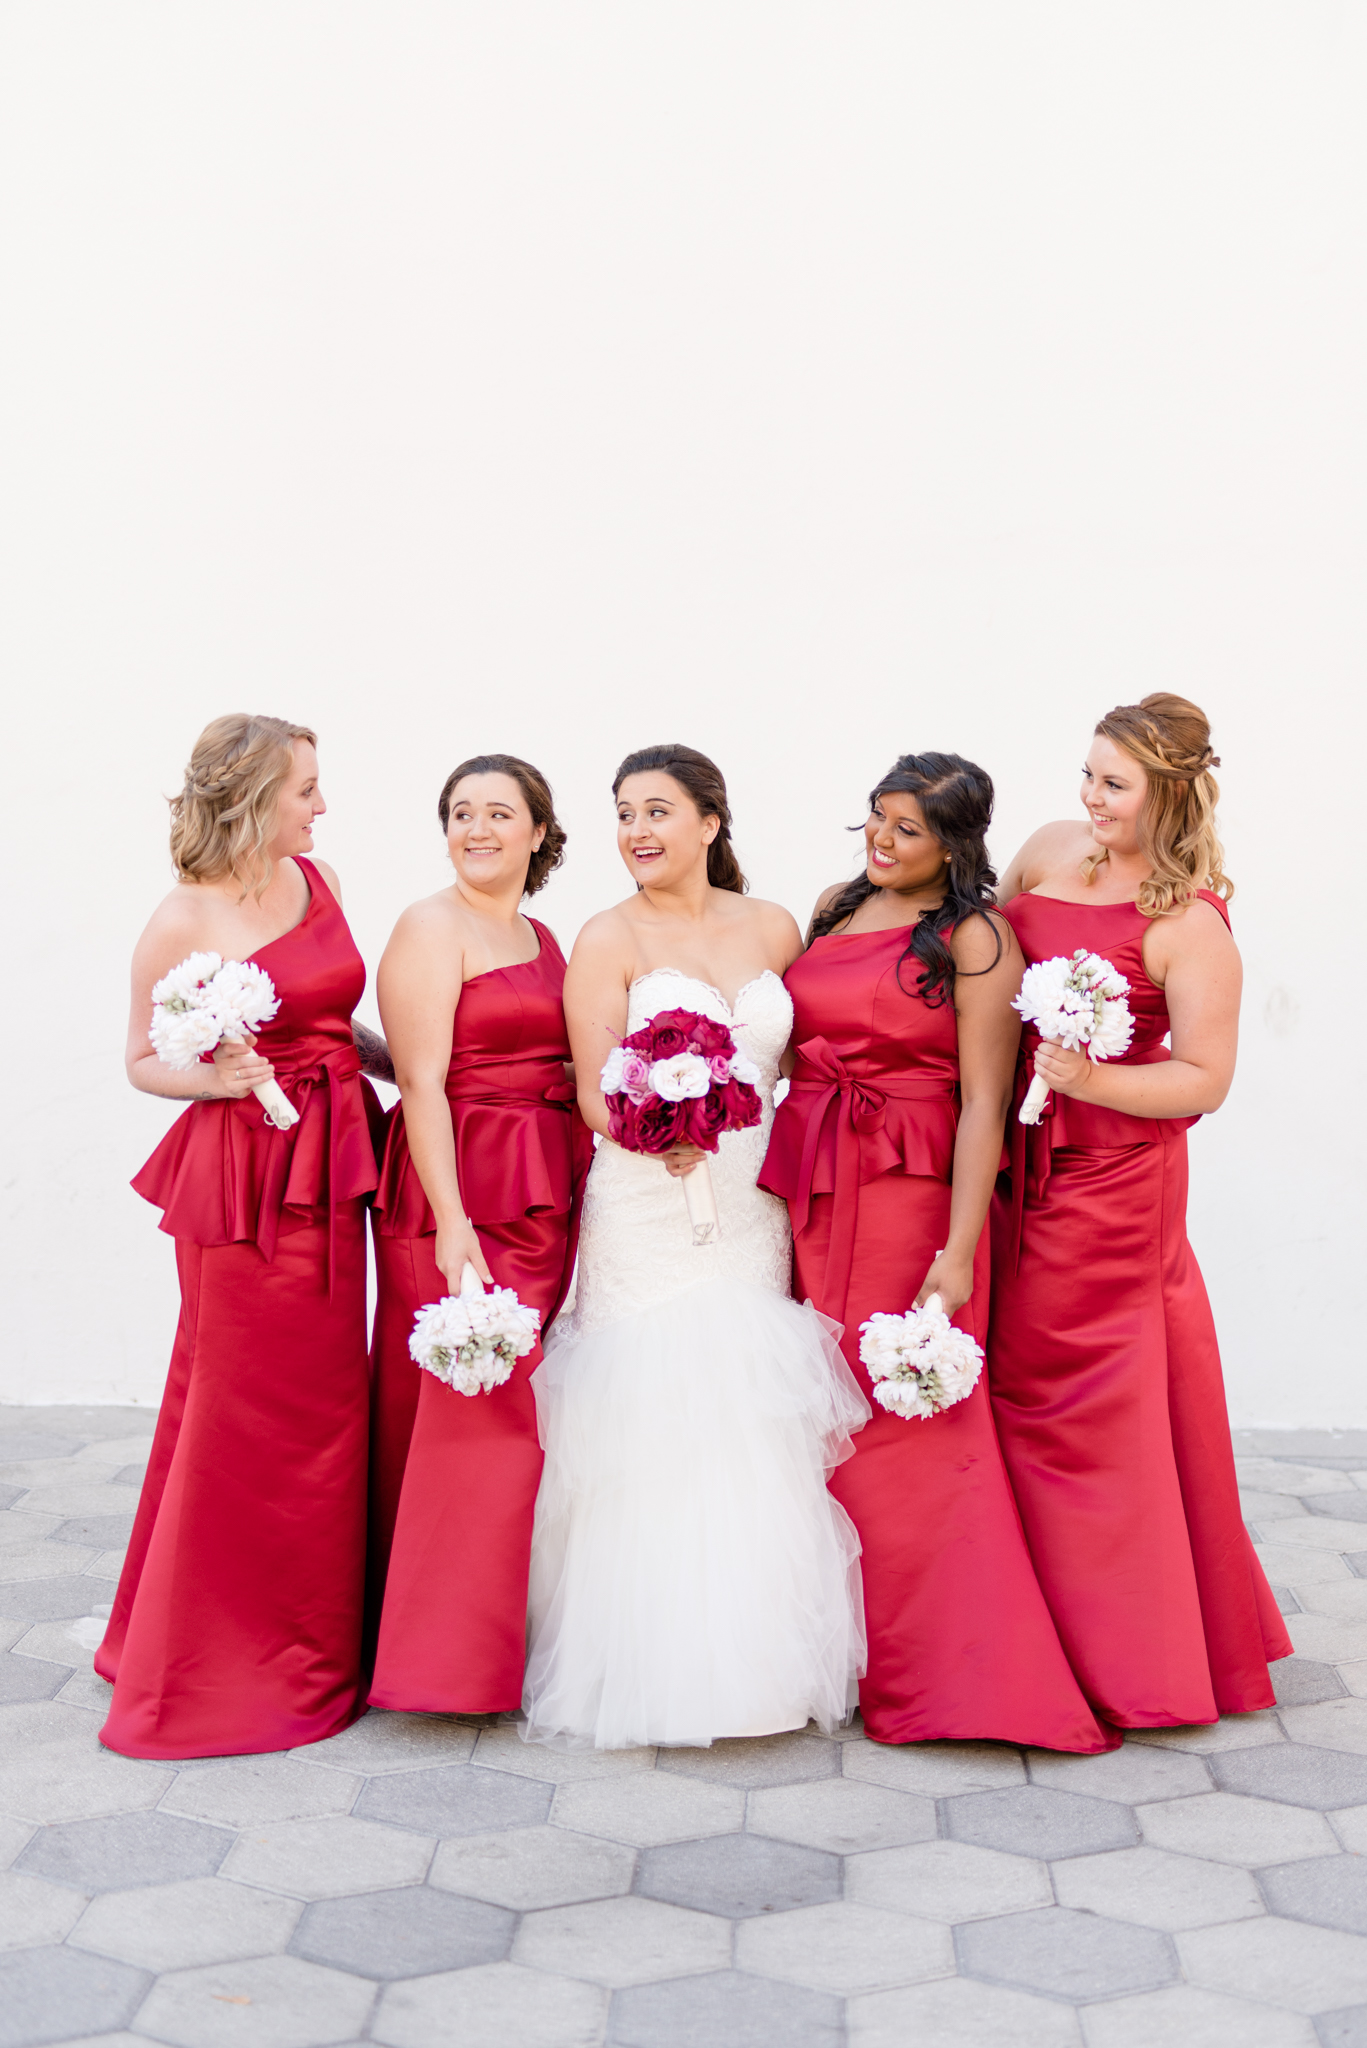 Bridal Party Stands next to white wall and laughs.